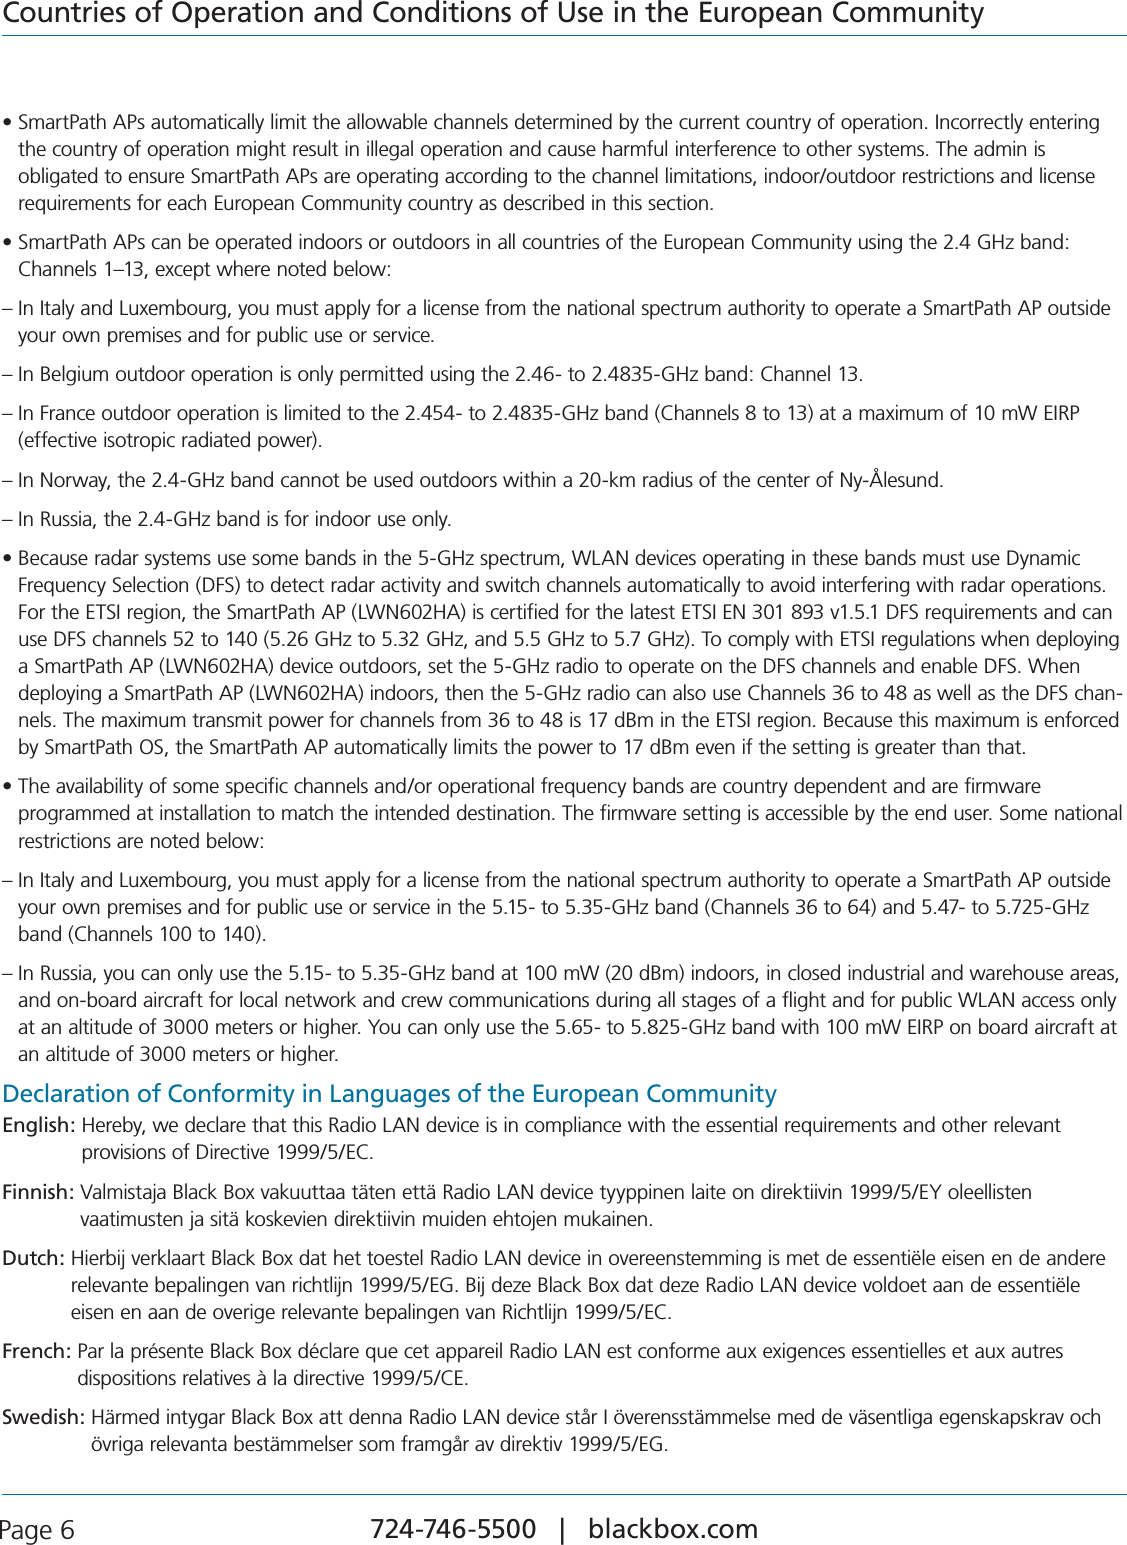 724-746-5500   |   blackbox.com Page 6Countries of Operation and Conditions of Use in the European Communitys3MART0ATH!0SAUTOMATICALLYLIMITTHEALLOWABLECHANNELSDETERMINEDBYTHECURRENTCOUNTRYOFOPERATION)NCORRECTLYENTERINGthe country of operation might result in illegal operation and cause harmful interference to other systems. The admin is  obligated to ensure SmartPath APs are operating according to the channel limitations, indoor/outdoor restrictions and license requirements for each European Community country as described in this section.s3MART0ATH!0SCANBEOPERATEDINDOORSOROUTDOORSINALLCOUNTRIESOFTHE%UROPEAN#OMMUNITYUSINGTHE&apos;(ZBANDChannels 1–13, except where noted below:–  In Italy and Luxembourg, you must apply for a license from the national spectrum authority to operate a SmartPath AP outside your own premises and for public use or service.– In Belgium outdoor operation is only permitted using the 2.46- to 2.4835-GHz band: Channel 13.–  In France outdoor operation is limited to the 2.454- to 2.4835-GHz band (Channels 8 to 13) at a maximum of 10 mW EIRP (effective isotropic radiated power).– In Norway, the 2.4-GHz band cannot be used outdoors within a 20-km radius of the center of Ny-Ålesund.– In Russia, the 2.4-GHz band is for indoor use only.s&quot;ECAUSERADARSYSTEMSUSESOMEBANDSINTHE&apos;(ZSPECTRUM7,!.DEVICESOPERATINGINTHESEBANDSMUSTUSE$YNAMICFrequency Selection (DFS) to detect radar activity and switch channels automatically to avoid interfering with radar operations. For the ETSI region, the SmartPath AP (LWN602HA) is certified for the latest ETSI EN 301 893 v1.5.1 DFS requirements and can use DFS channels 52 to 140 (5.26 GHz to 5.32 GHz, and 5.5 GHz to 5.7 GHz). To comply with ETSI regulations when deploying a SmartPath AP (LWN602HA) device outdoors, set the 5-GHz radio to operate on the DFS channels and enable DFS. When deploying a SmartPath AP (LWN602HA) indoors, then the 5-GHz radio can also use Channels 36 to 48 as well as the DFS chan-nels. The maximum transmit power for channels from 36 to 48 is 17 dBm in the ETSI region. Because this maximum is enforced by SmartPath OS, the SmartPath AP automatically limits the power to 17 dBm even if the setting is greater than that.s4HEAVAILABILITYOFSOMESPECIFICCHANNELSANDOROPERATIONALFREQUENCYBANDSARECOUNTRYDEPENDENTANDAREFIRMWARE programmed at installation to match the intended destination. The firmware setting is accessible by the end user. Some national restrictions are noted below:–  In Italy and Luxembourg, you must apply for a license from the national spectrum authority to operate a SmartPath AP outside your own premises and for public use or service in the 5.15- to 5.35-GHz band (Channels 36 to 64) and 5.47- to 5.725-GHz band (Channels 100 to 140).–  In Russia, you can only use the 5.15- to 5.35-GHz band at 100 mW (20 dBm) indoors, in closed industrial and warehouse areas, and on-board aircraft for local network and crew communications during all stages of a flight and for public WLAN access only at an altitude of 3000 meters or higher. You can only use the 5.65- to 5.825-GHz band with 100 mW EIRP on board aircraft at an altitude of 3000 meters or higher.Declaration of Conformity in Languages of the European CommunityEnglish:  Hereby, we declare that this Radio LAN device is in compliance with the essential requirements and other relevant  provisions of Directive 1999/5/EC.Finnish:  Valmistaja Black Box vakuuttaa täten että Radio LAN device tyyppinen laite on direktiivin 1999/5/EY oleellisten  vaatimusten ja sitä koskevien direktiivin muiden ehtojen mukainen.Dutch:  Hierbij verklaart Black Box dat het toestel Radio LAN device in overeenstemming is met de essentiële eisen en de andere relevante bepalingen van richtlijn 1999/5/EG. Bij deze Black Box dat deze Radio LAN device voldoet aan de essentiële eisen en aan de overige relevante bepalingen van Richtlijn 1999/5/EC.French:  Par la présente Black Box déclare que cet appareil Radio LAN est conforme aux exigences essentielles et aux autres  dispositions relatives à la directive 1999/5/CE.Swedish:  Härmed intygar Black Box att denna Radio LAN device står I överensstämmelse med de väsentliga egenskapskrav och övriga relevanta bestämmelser som framgår av direktiv 1999/5/EG.